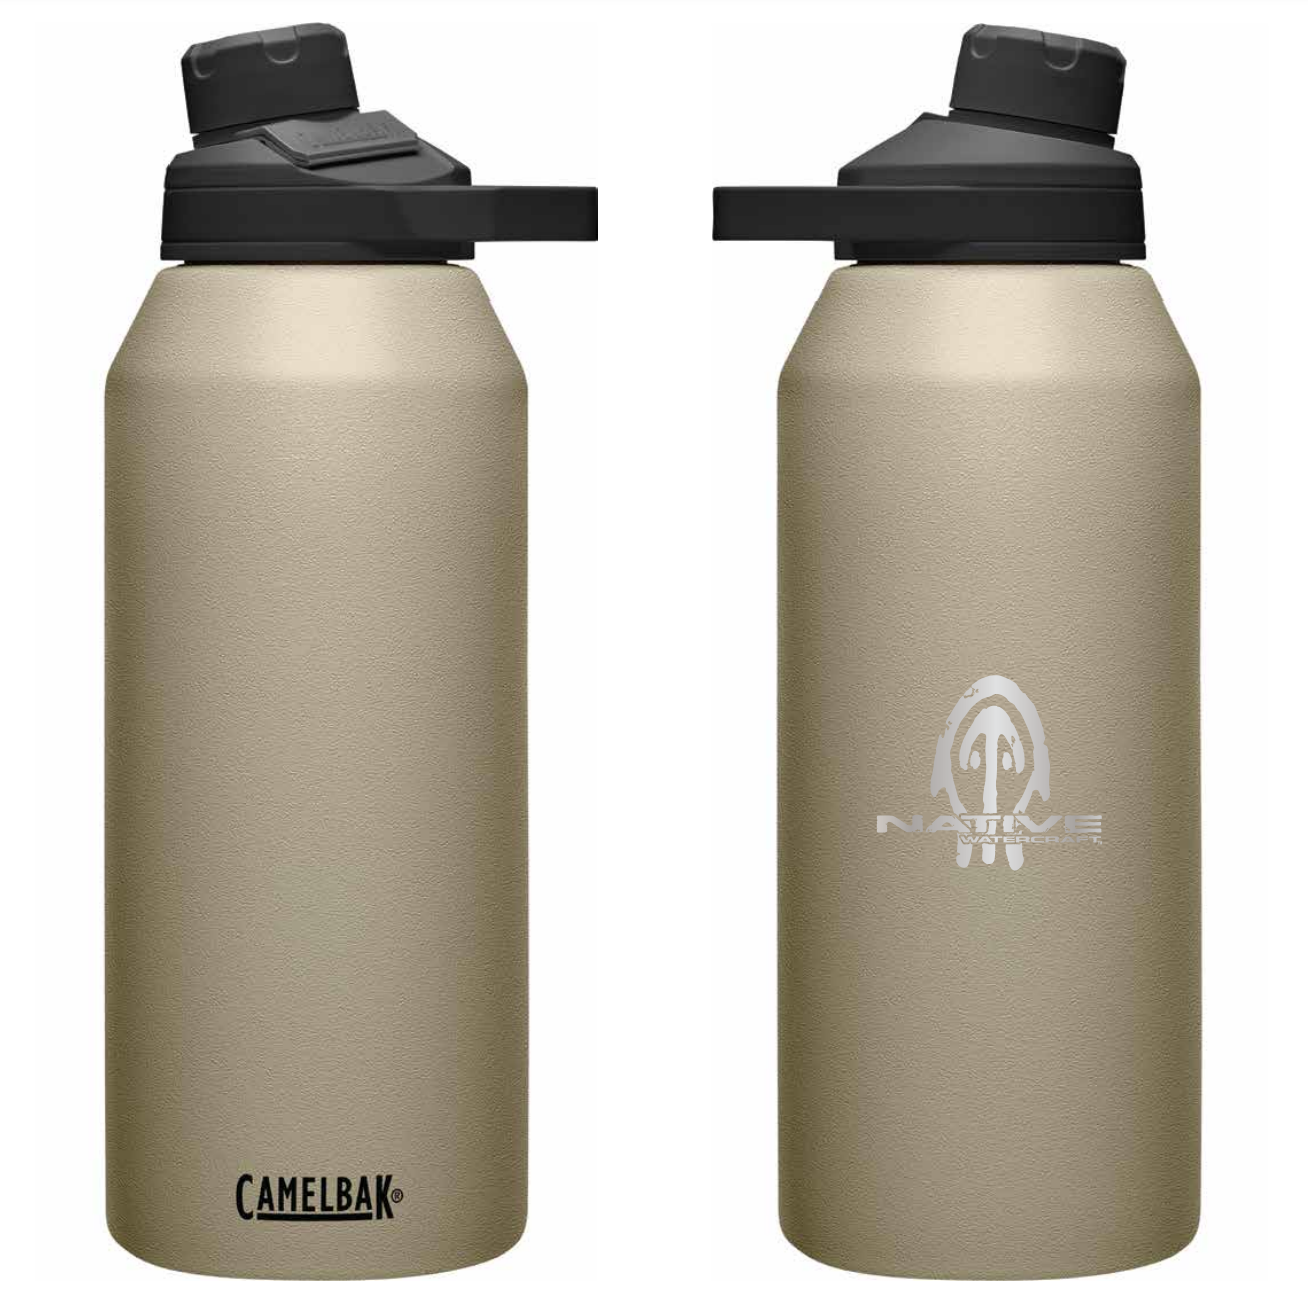 Insulated water bottle keeps cold for two days! Stays hot for many hours!